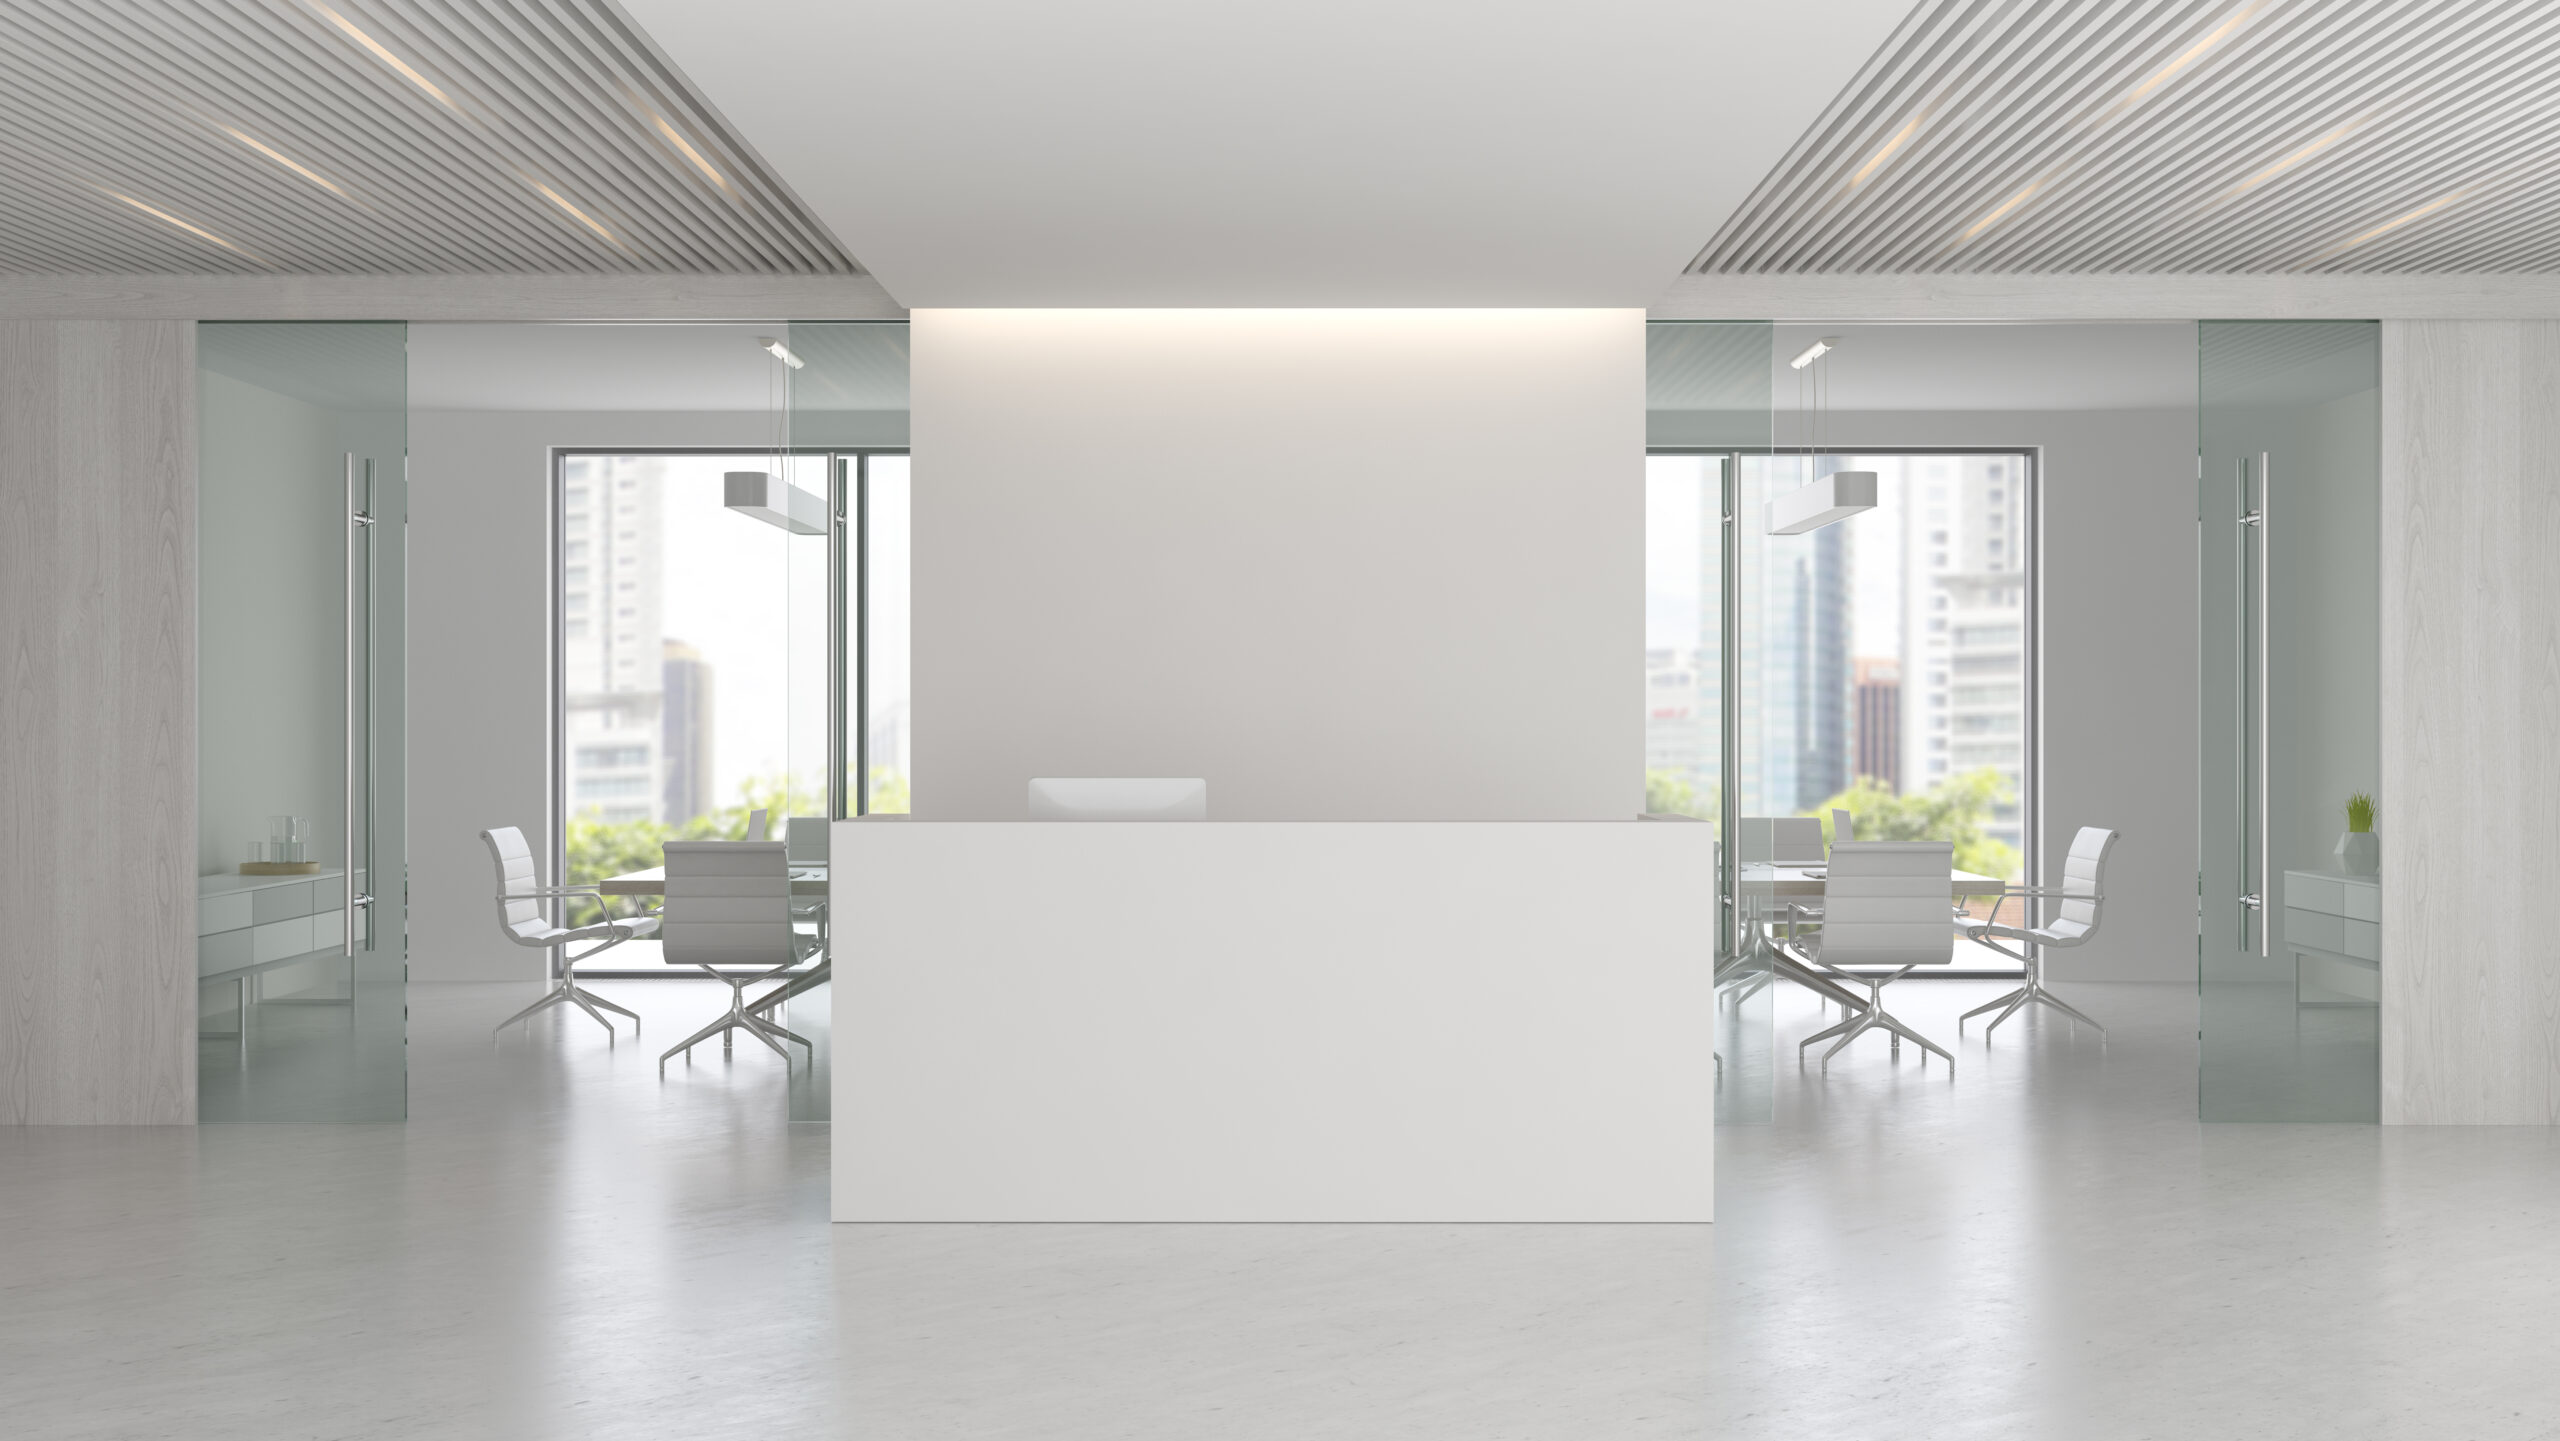 How To Improve Your Office’s Reception Desk